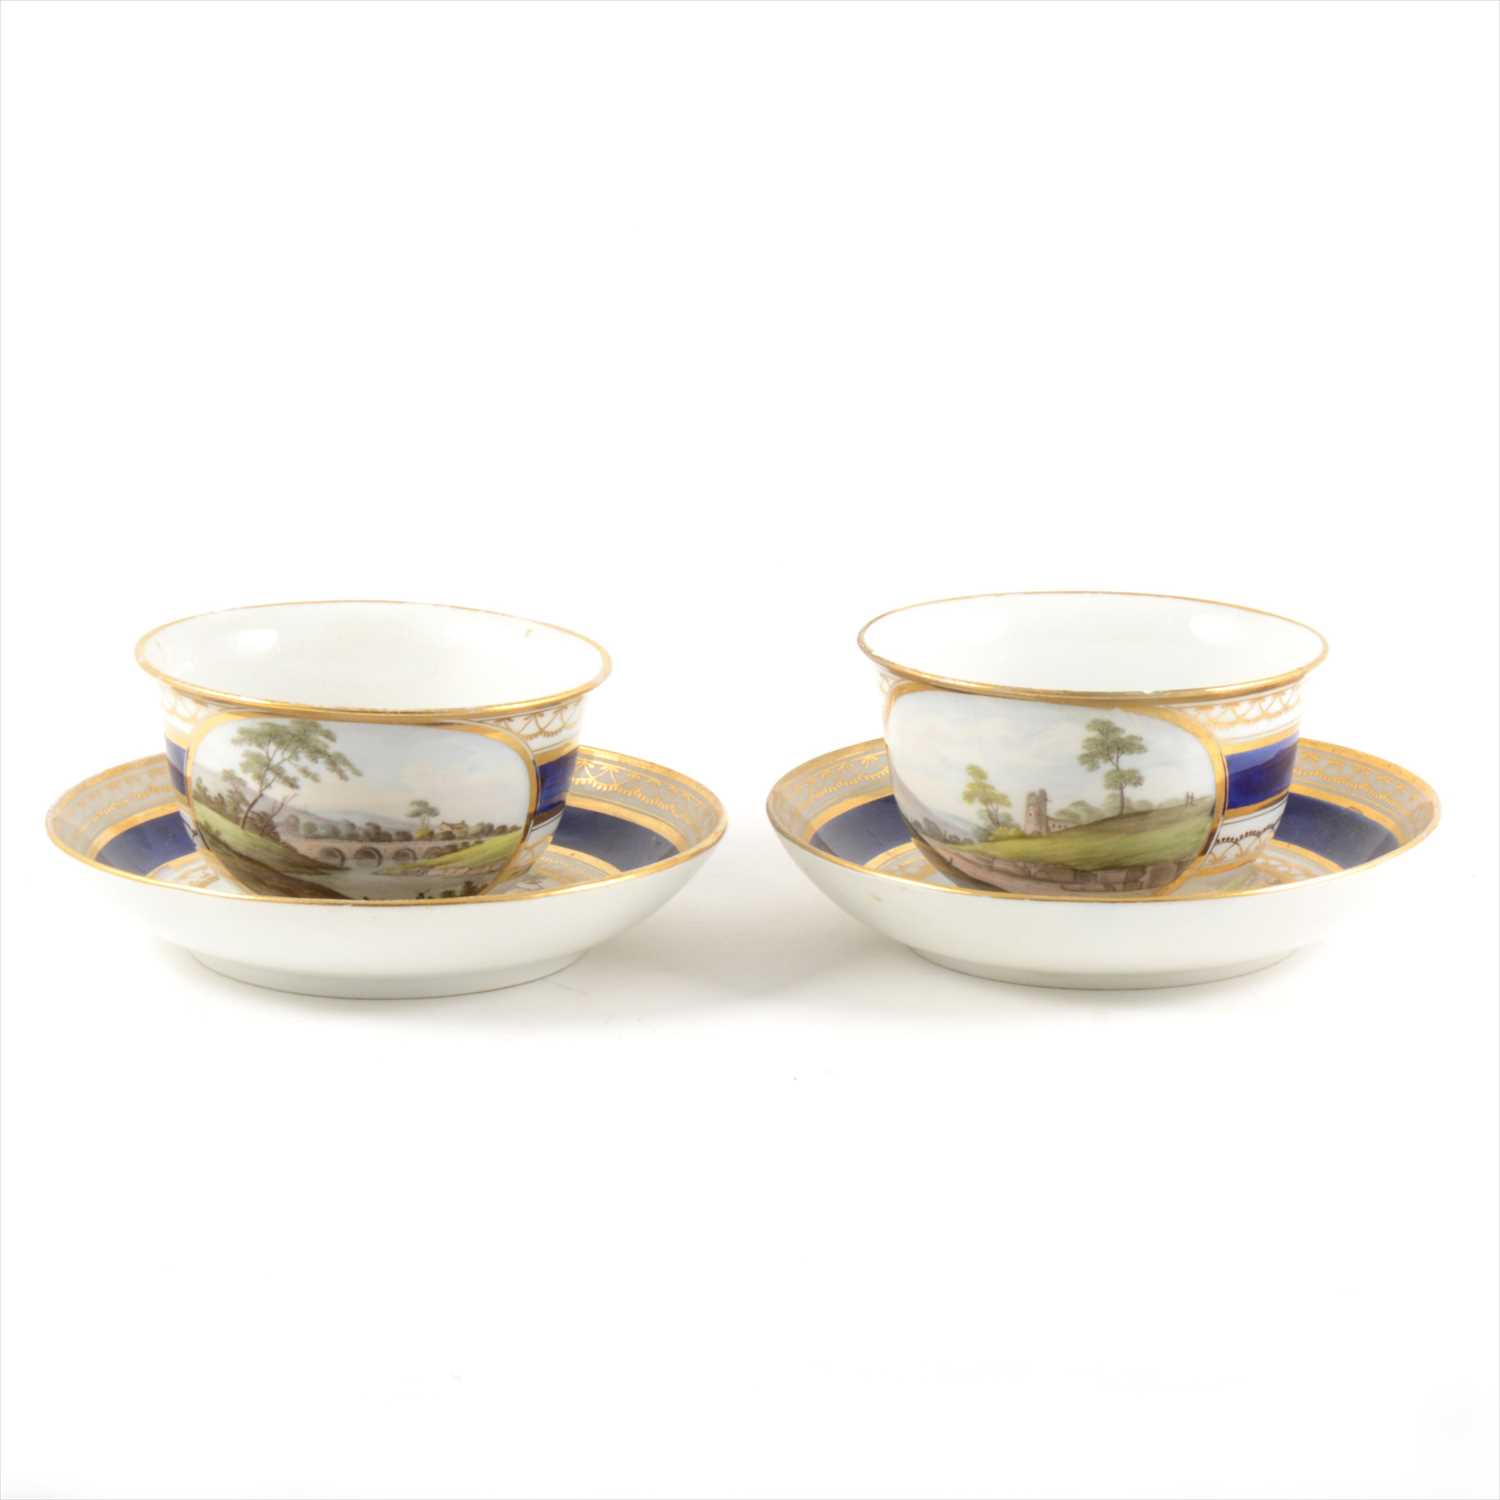 Lot 8 - A pair of Derby style porcelain breakfast cups and saucers, with named views, Nr Caernarfon, South Wales